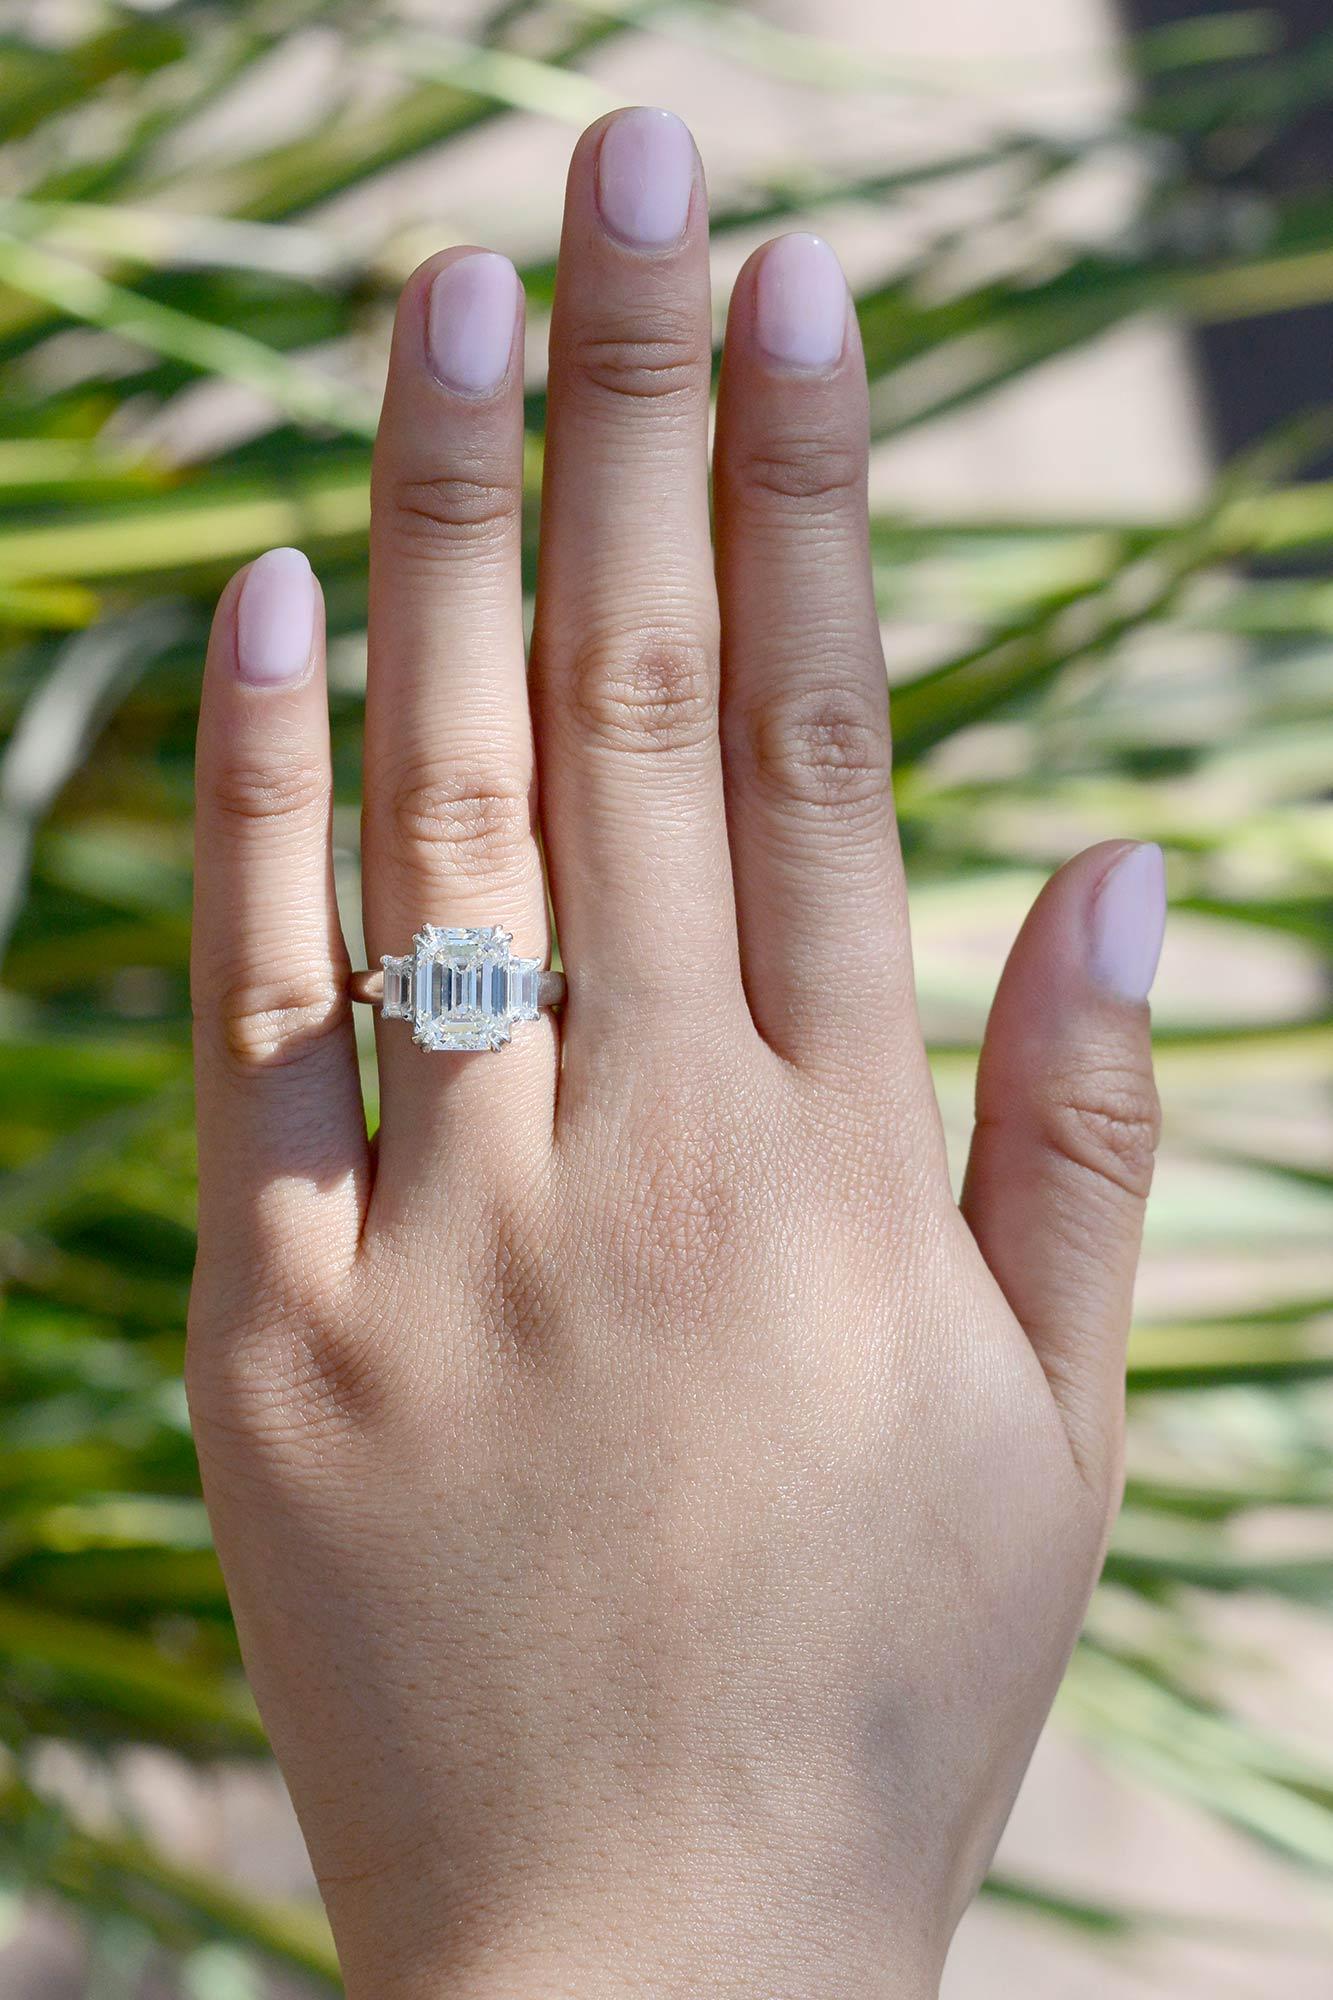 This luxurious diamond ring is a true masterpiece of high jewelry, featuring a stunning 5.01 carat emerald cut diamond that has been certified by the Gemological Institute of America (GIA) for its exceptional quality and brilliance. Graded as K